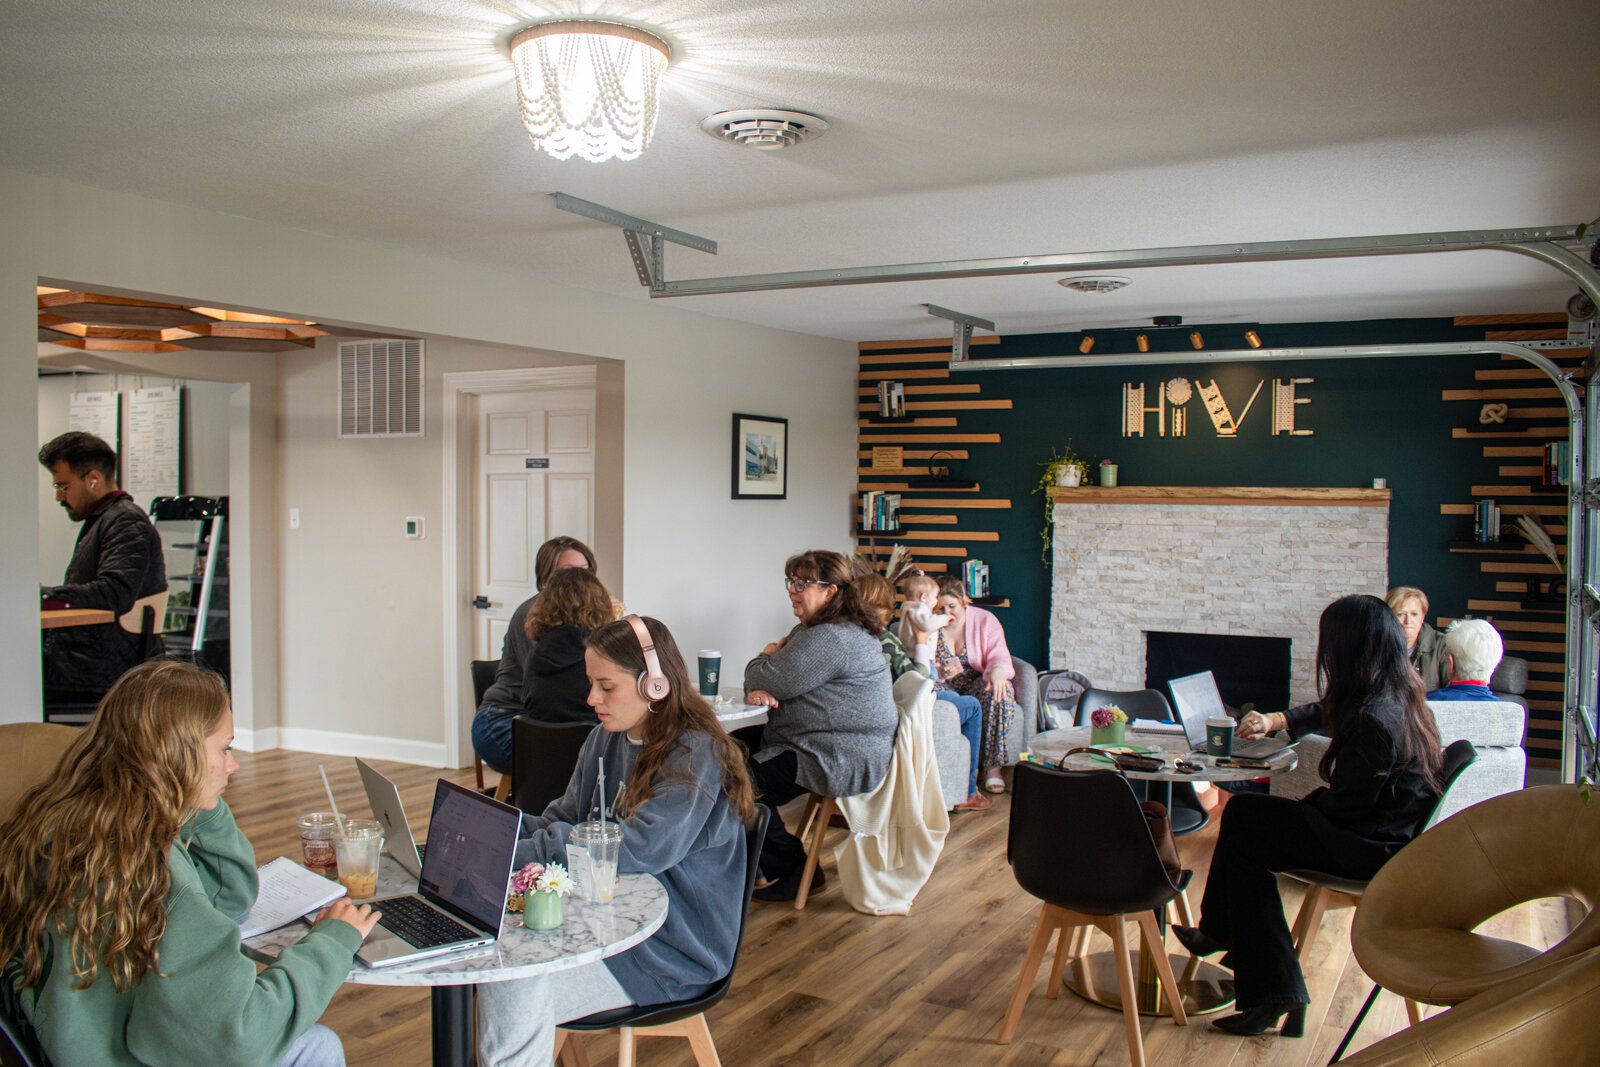 Customers at The Hive.